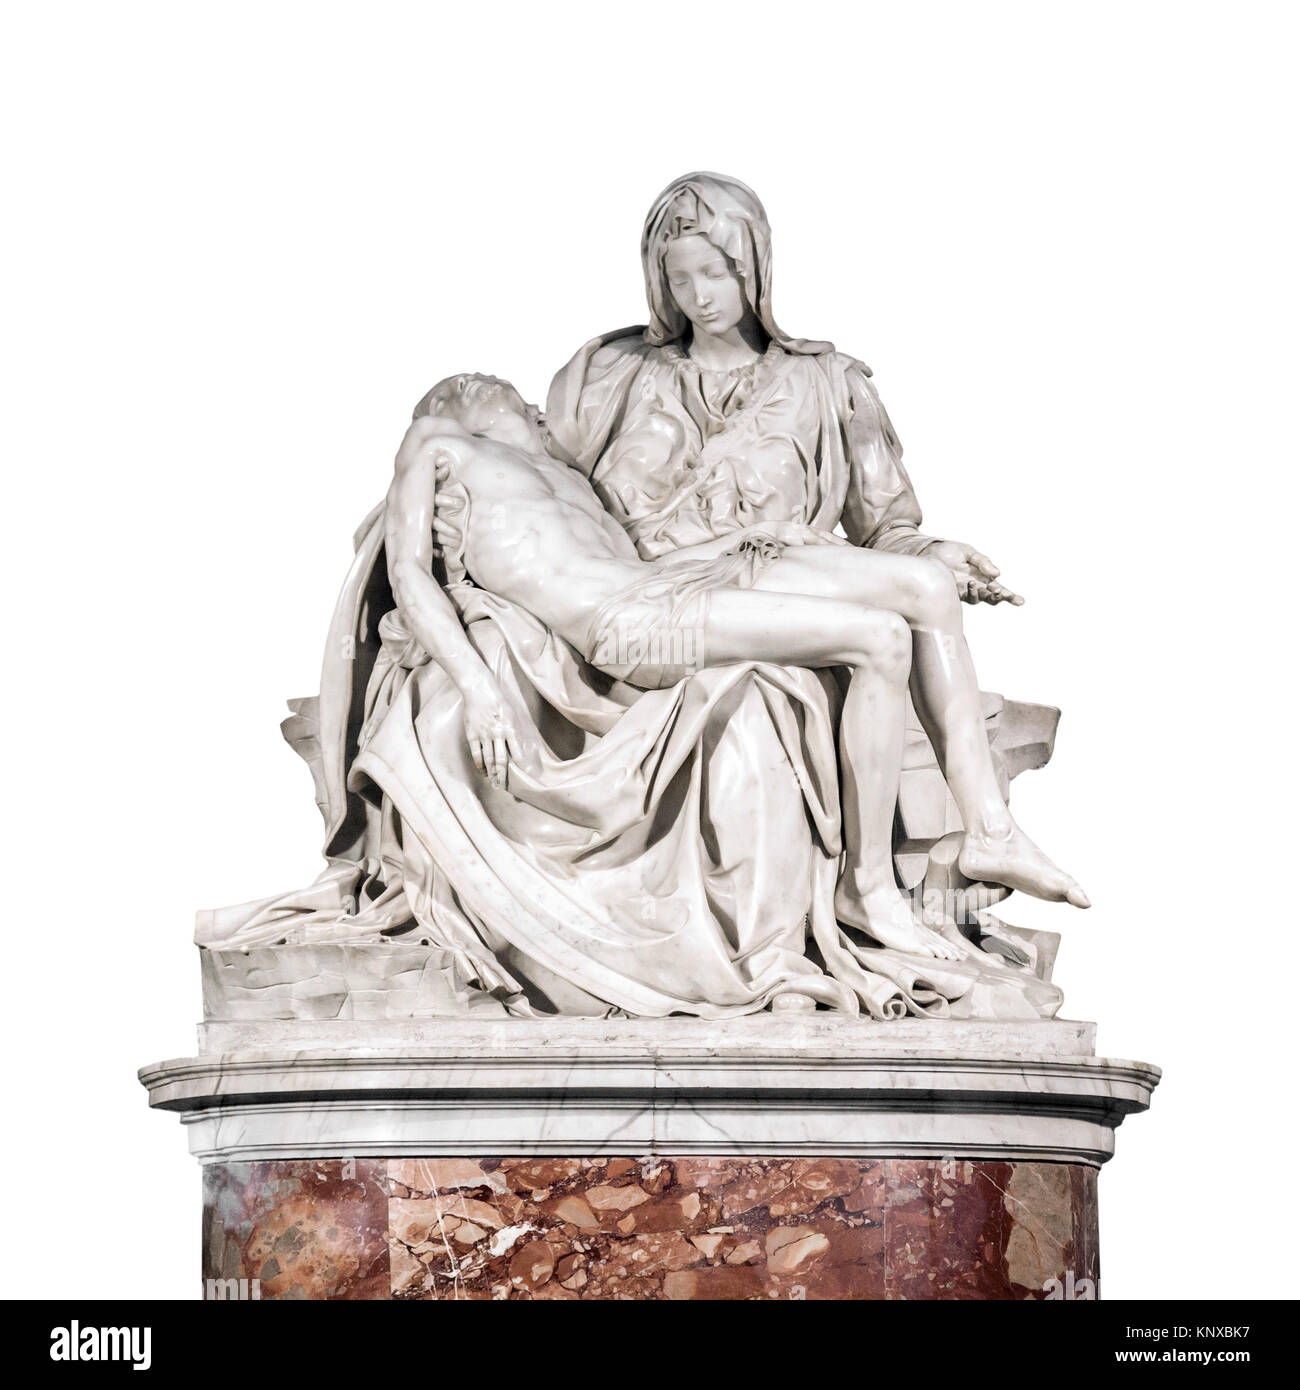 The Pieta, a work of Renaissance sculpture by Michelangelo Buonarroti isolated on white background. Famous work of art depicts the body of Jesus on th Stock Photo